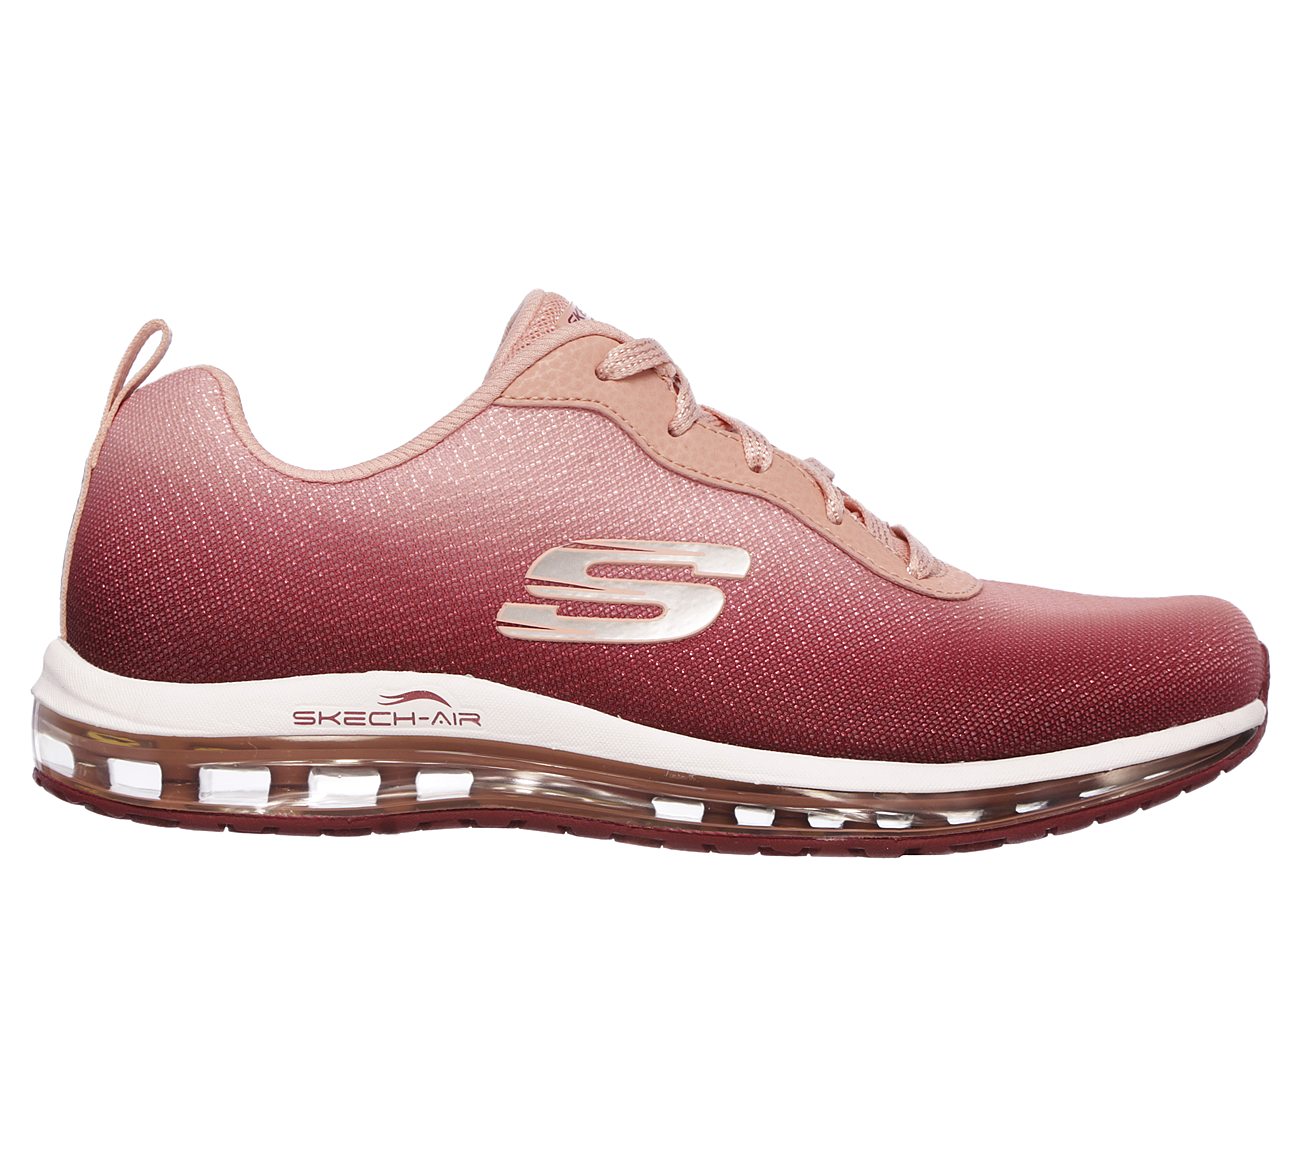 skechers shoes air